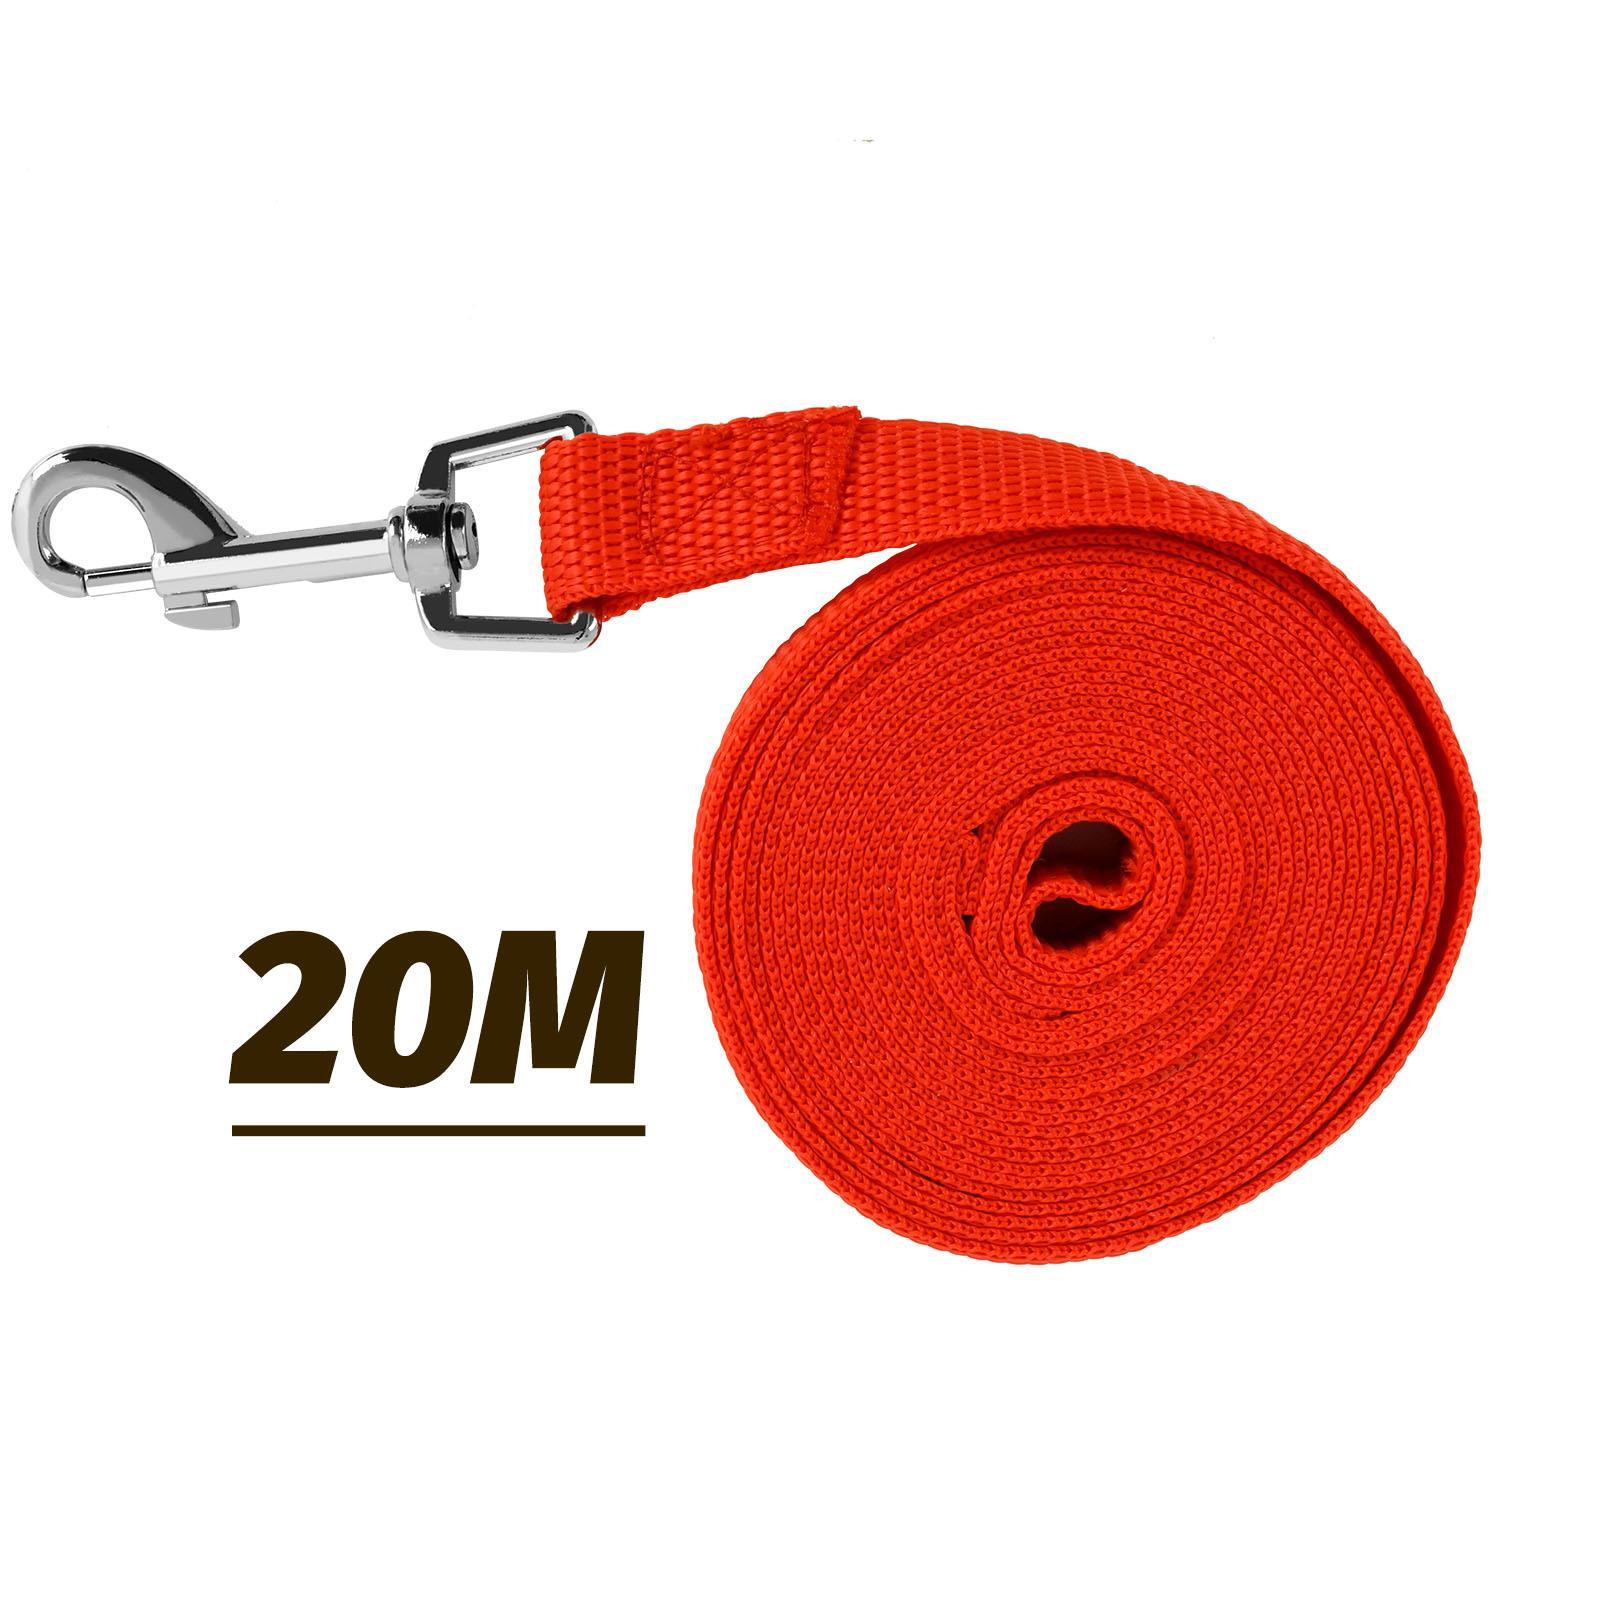 Advwin 20M Long Dog Lead for Walking Nylon Pet Dog Leash for Outdoor Obedience Recall Training or Camping Red